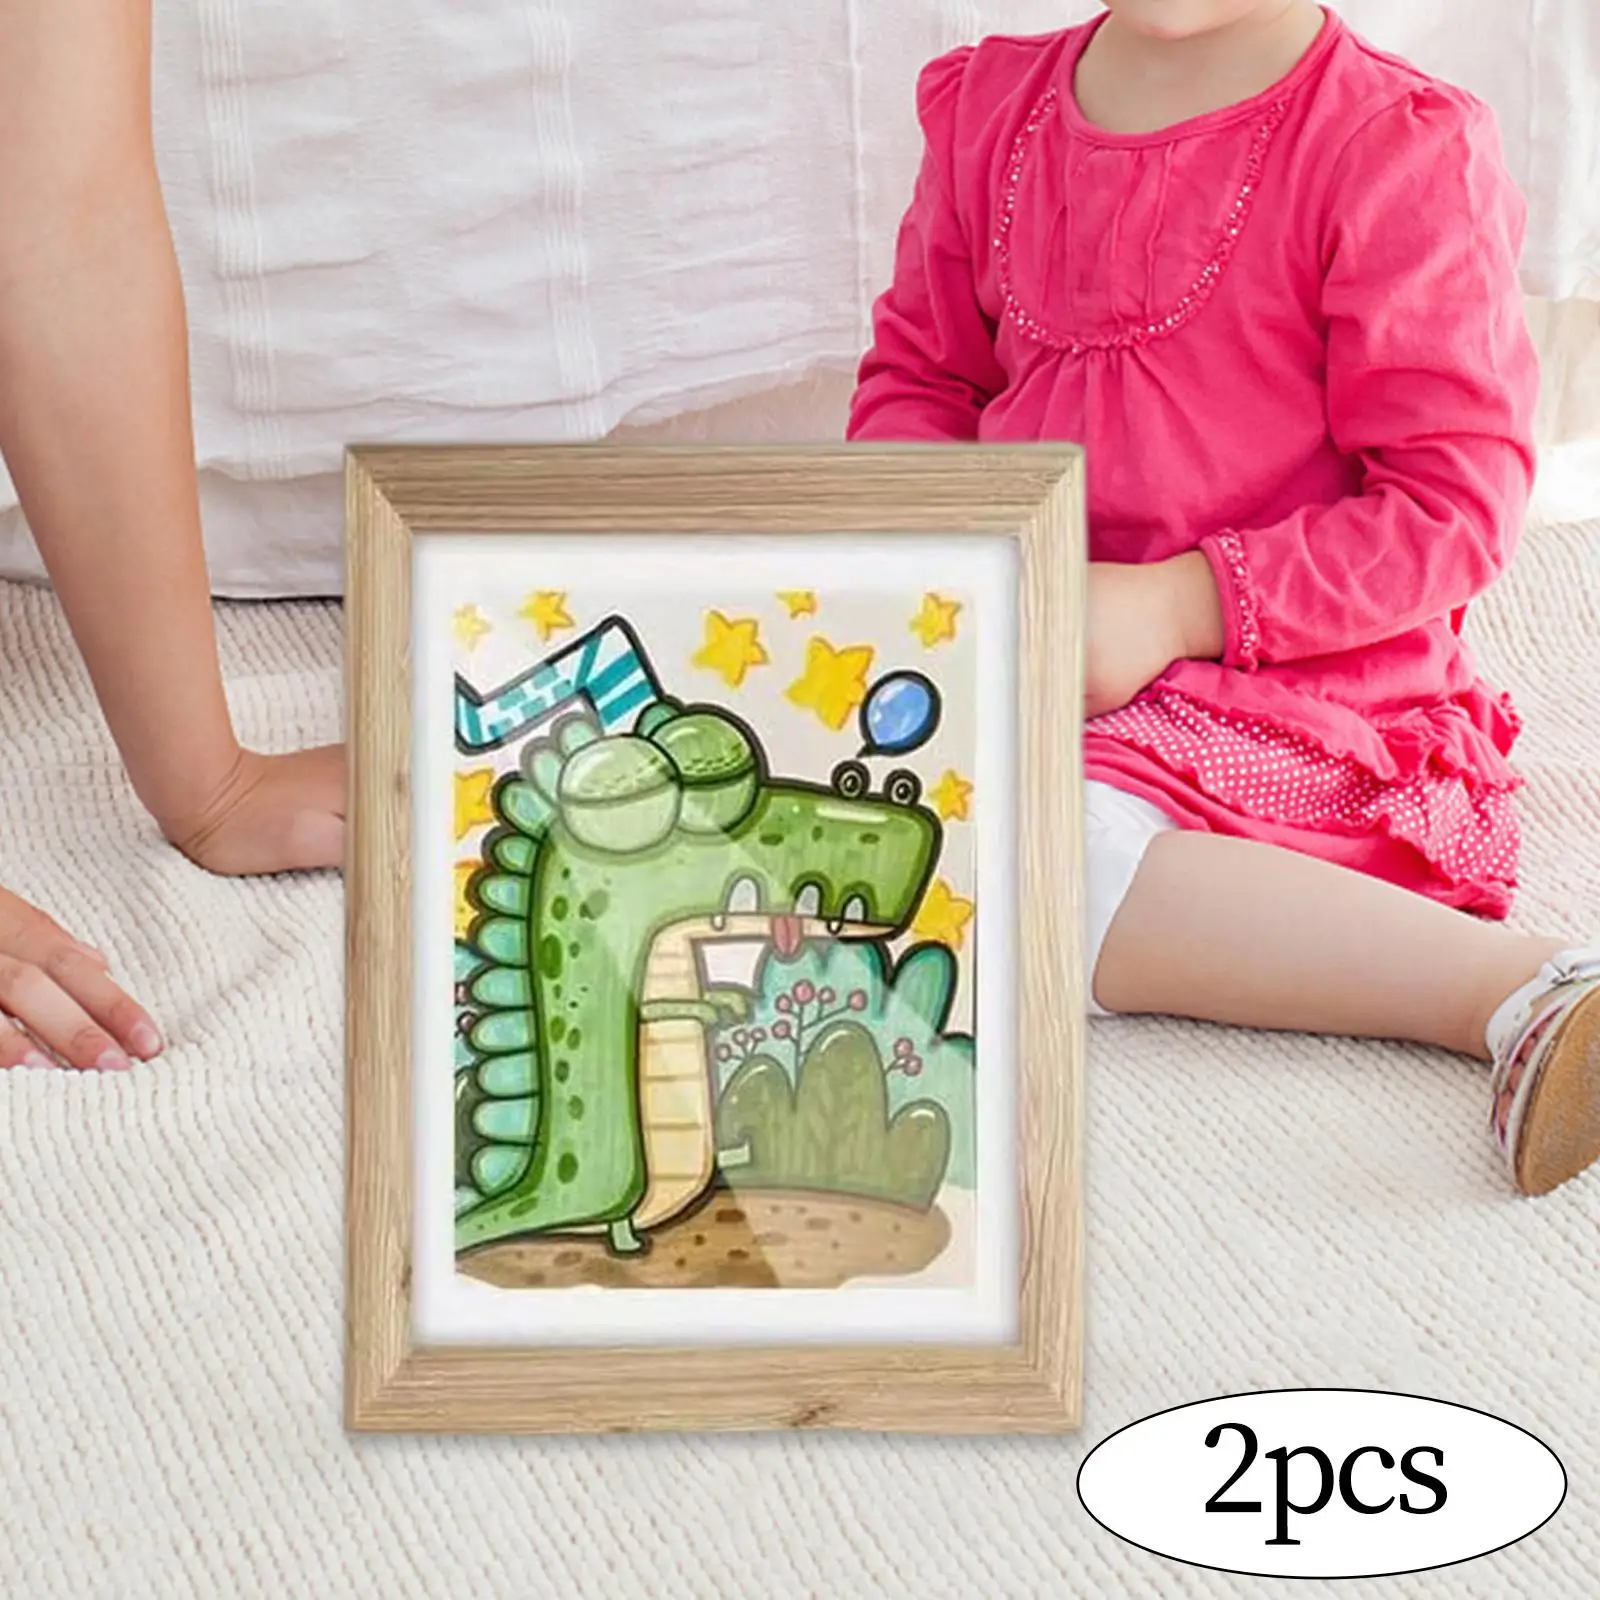 2 Pieces Wooden Photo Frame Children`s Art Frame Open Front Decorate Home Open